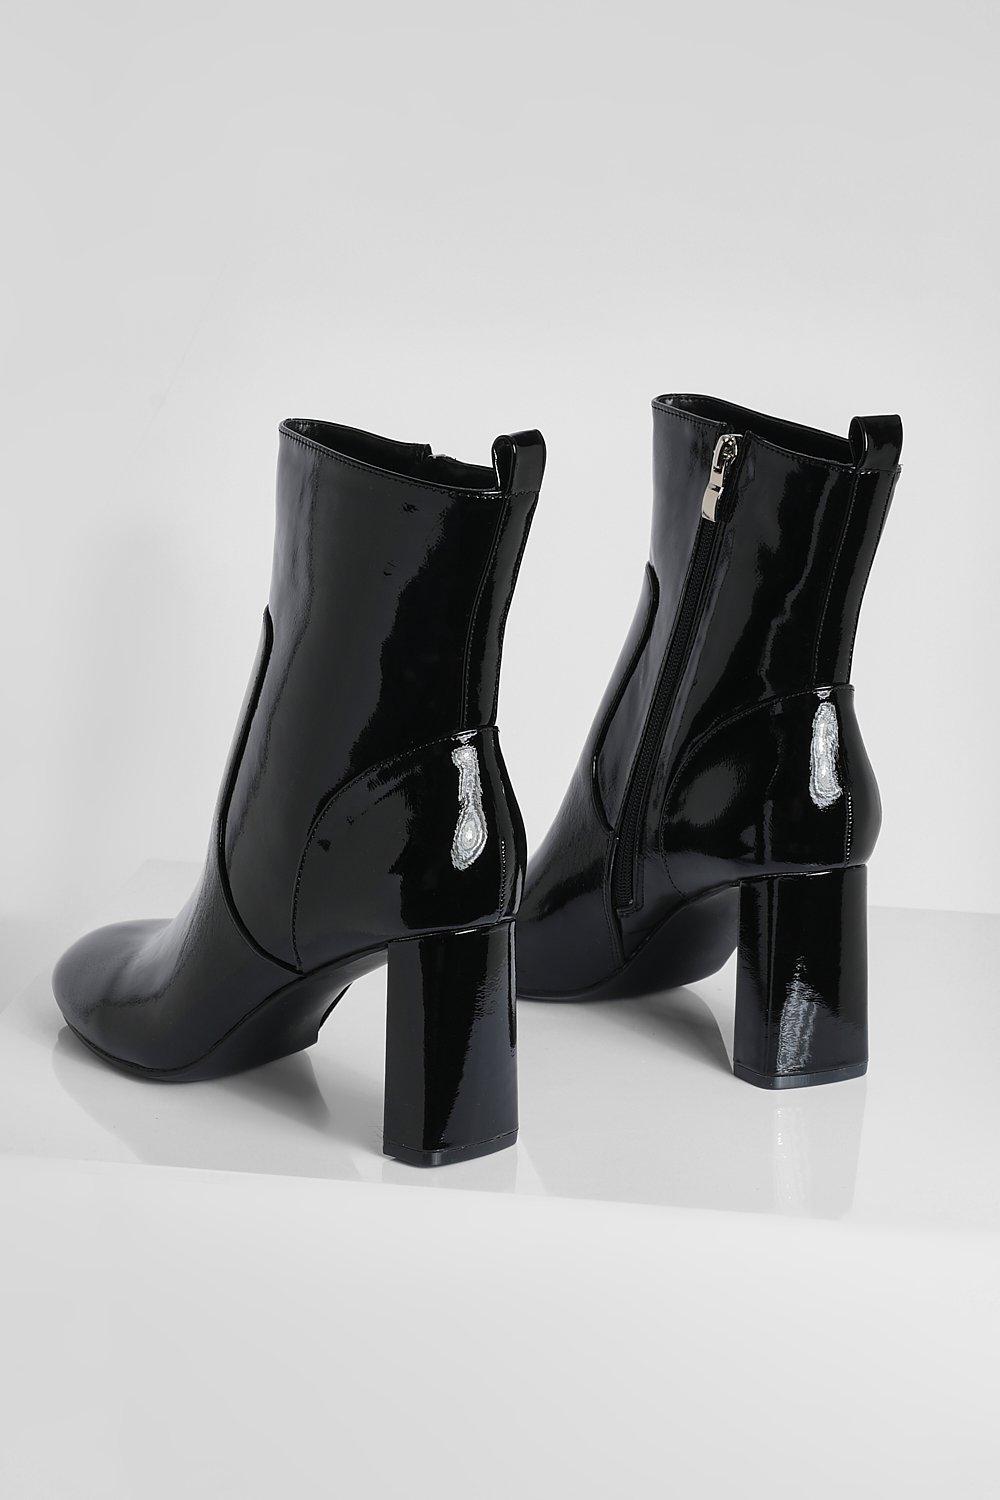 Louis Vuitton Sock Boot  Boots, Socks and heels, Dress with boots